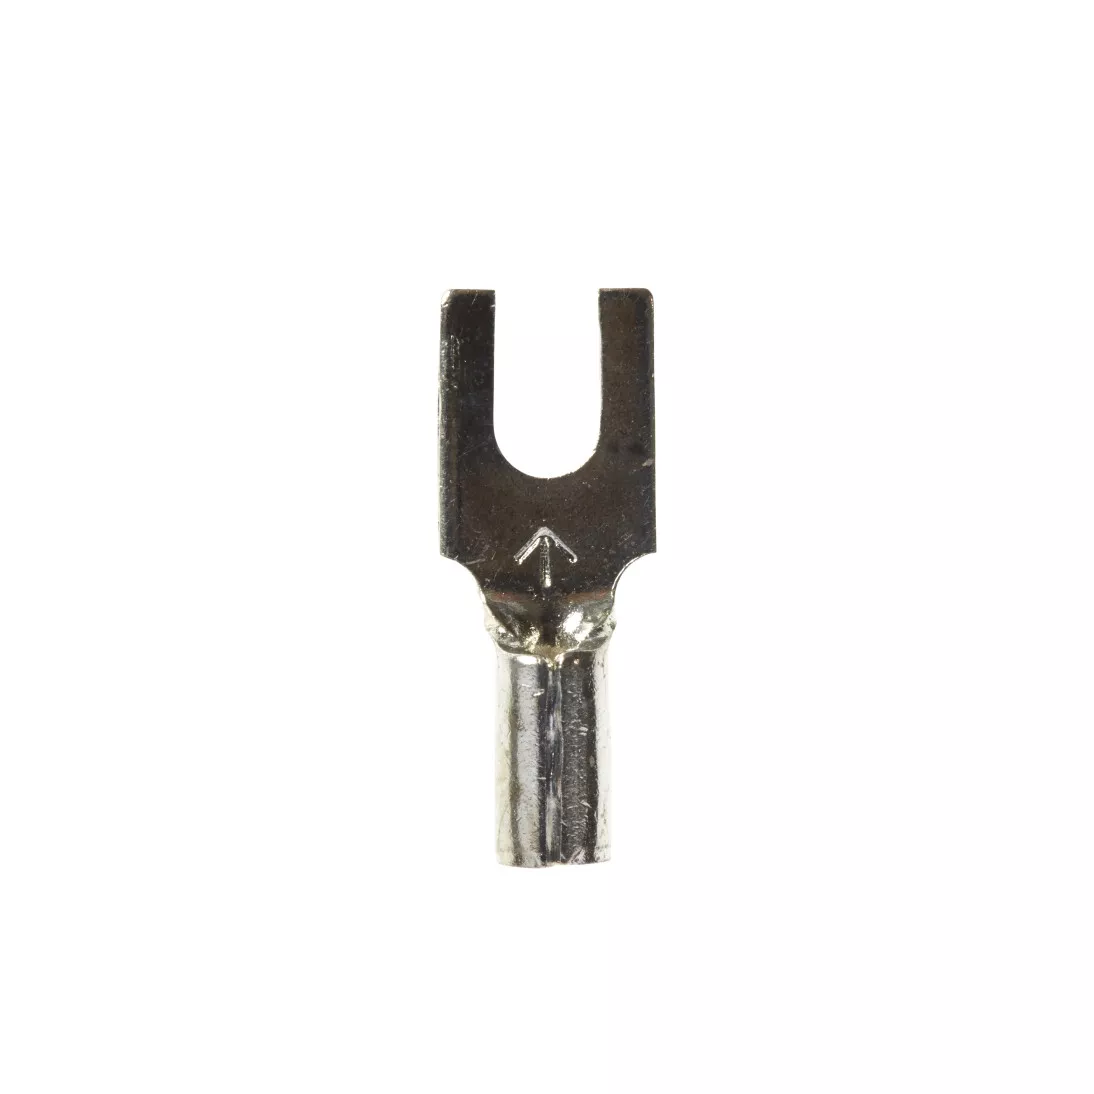 3M™ Scotchlok™ Block Fork, Non-Insulated Butted Seam MU18-4FB/SK, Stud
Size 4, suitable for use in a terminal block, 1000/Case